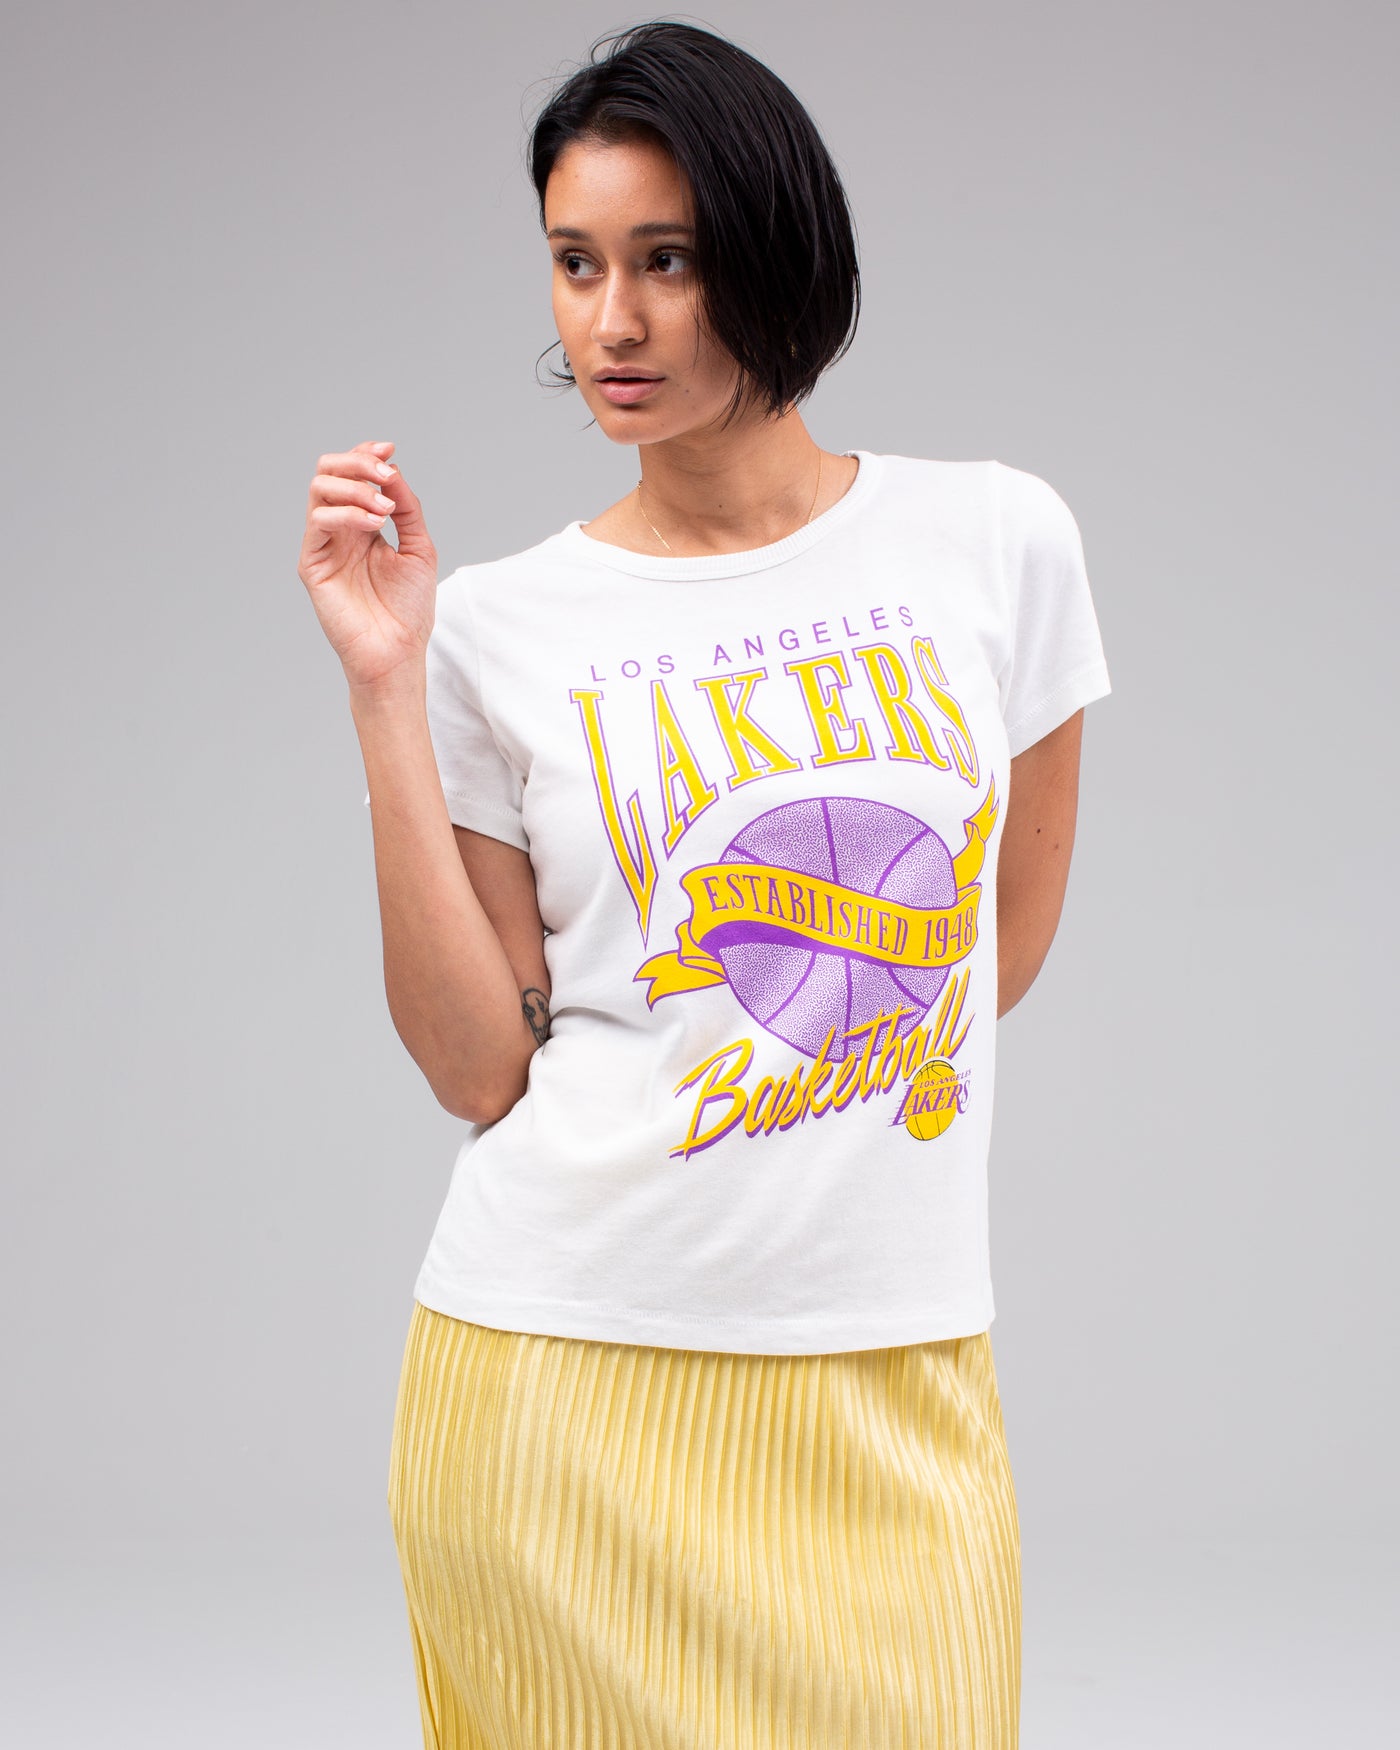 vintage lakers clothing